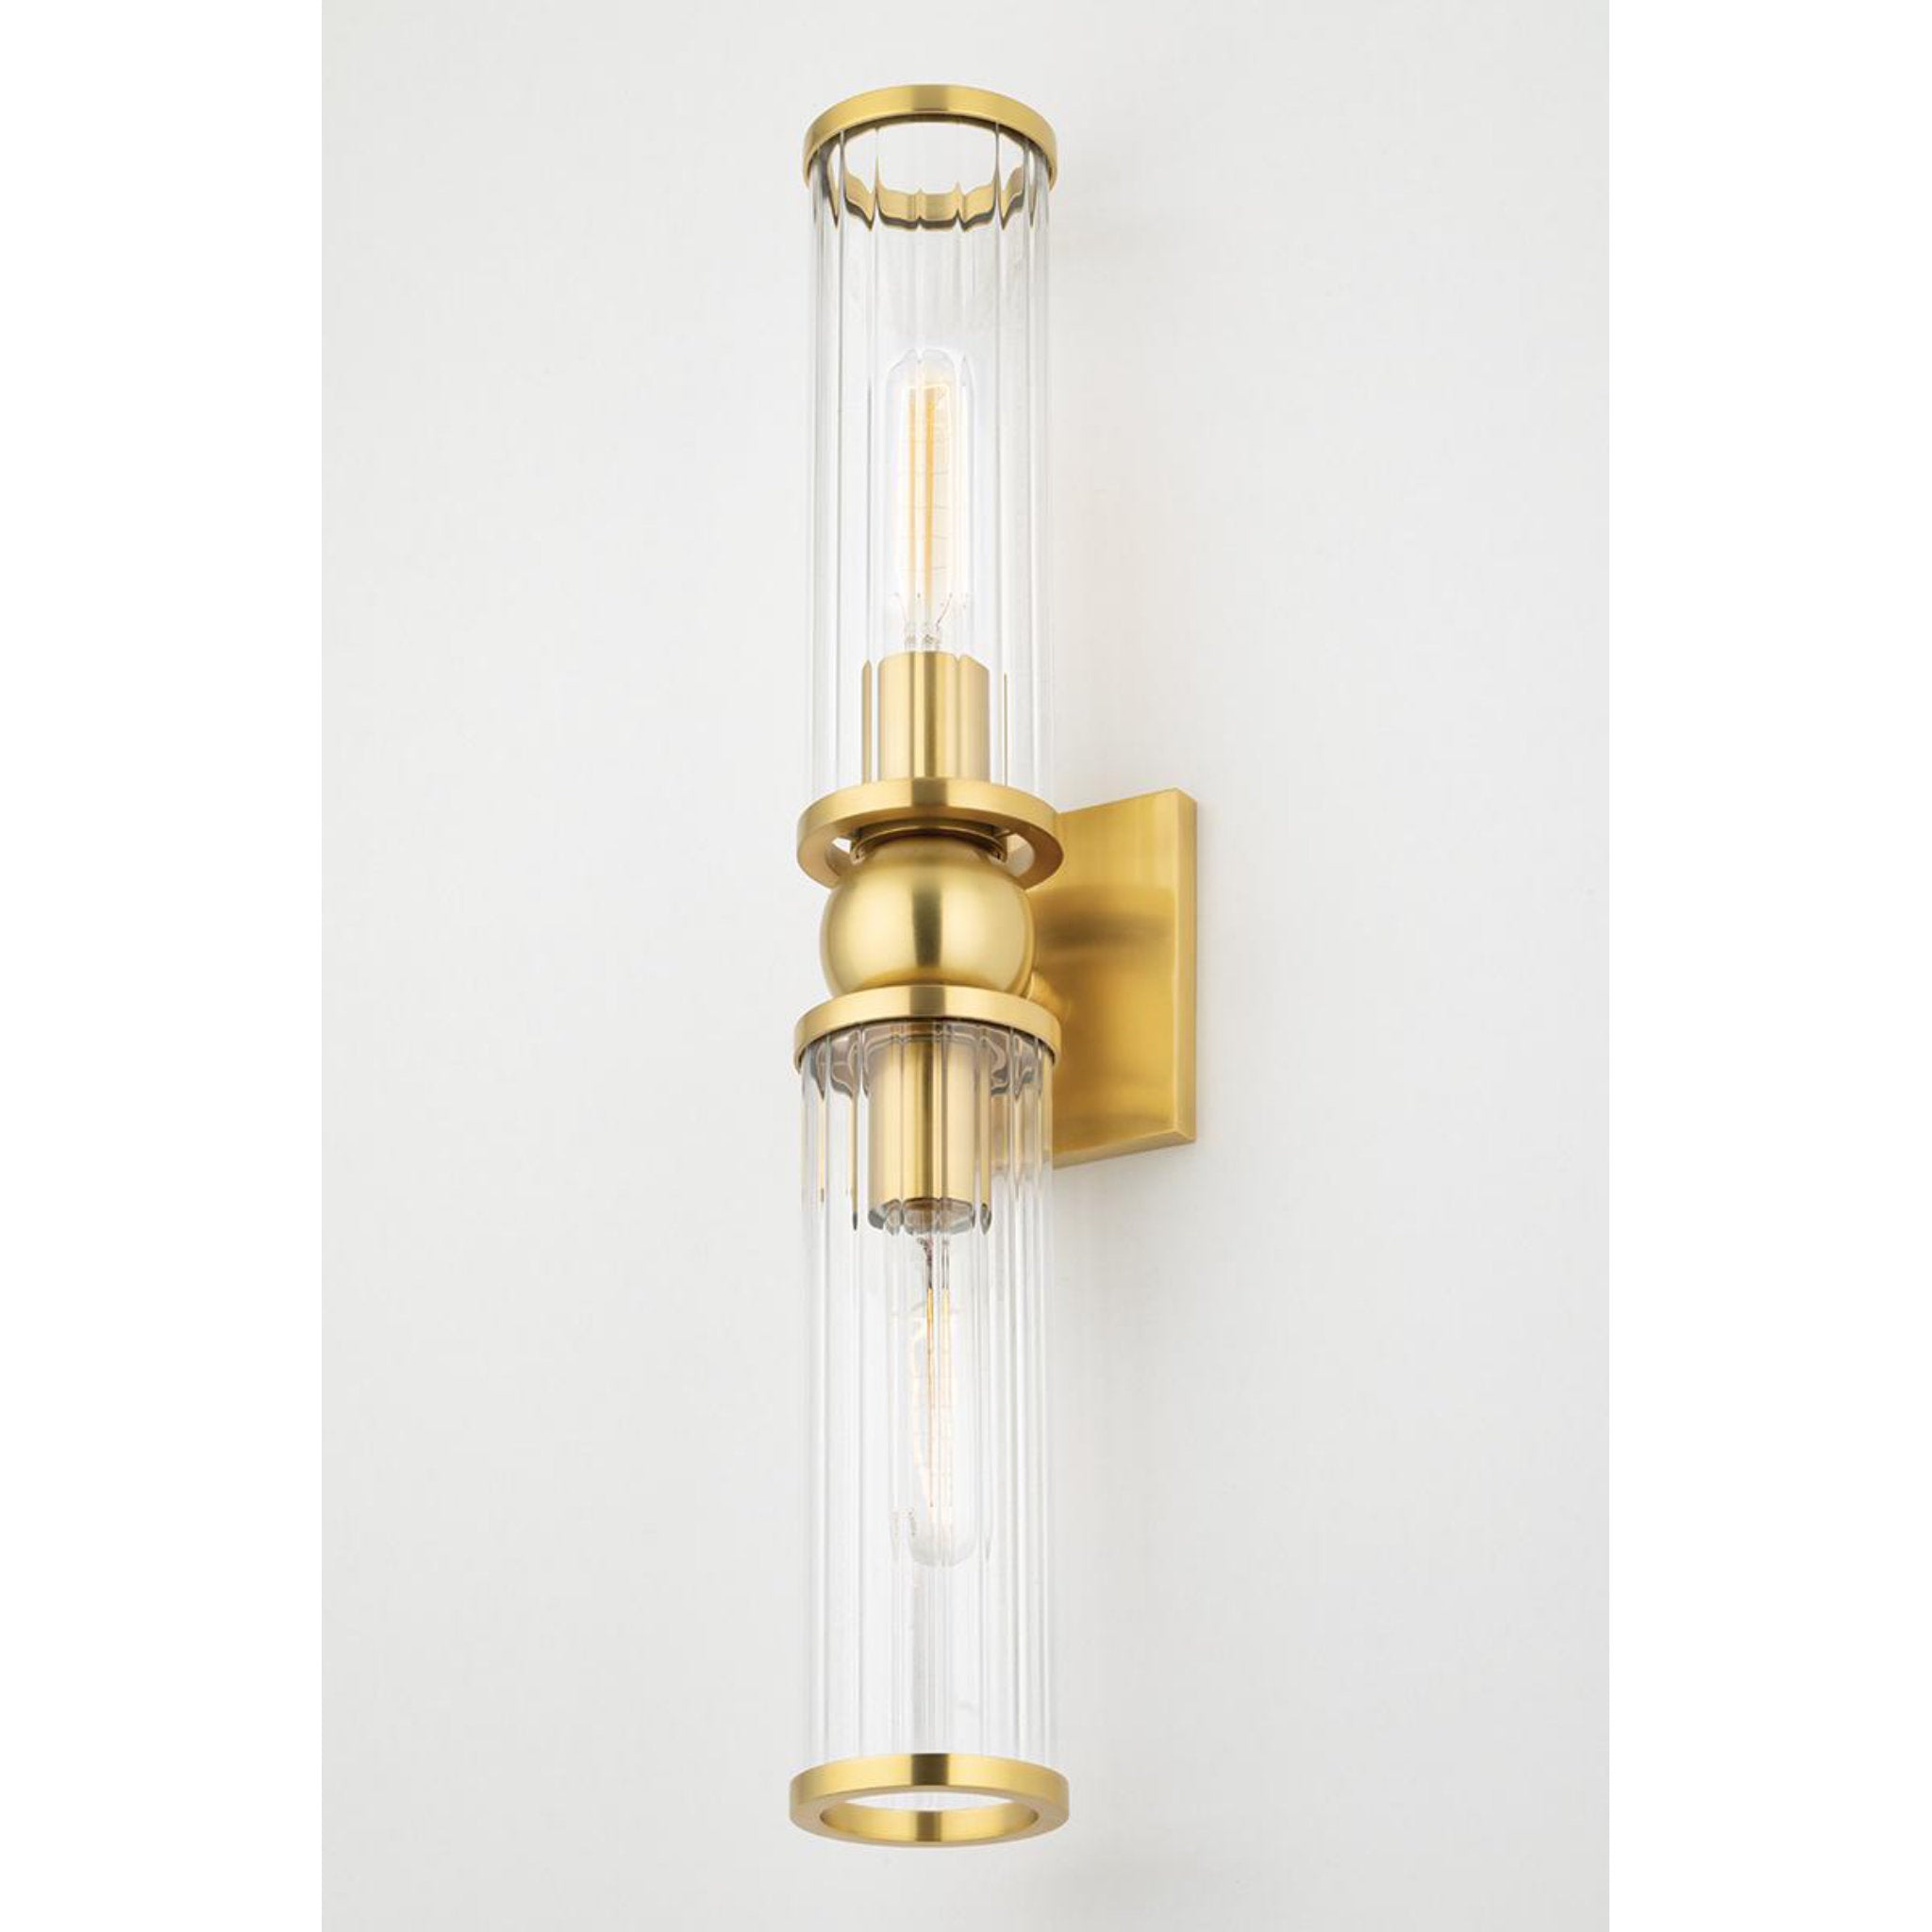 Malone 1 Light Wall Sconce in Aged Brass